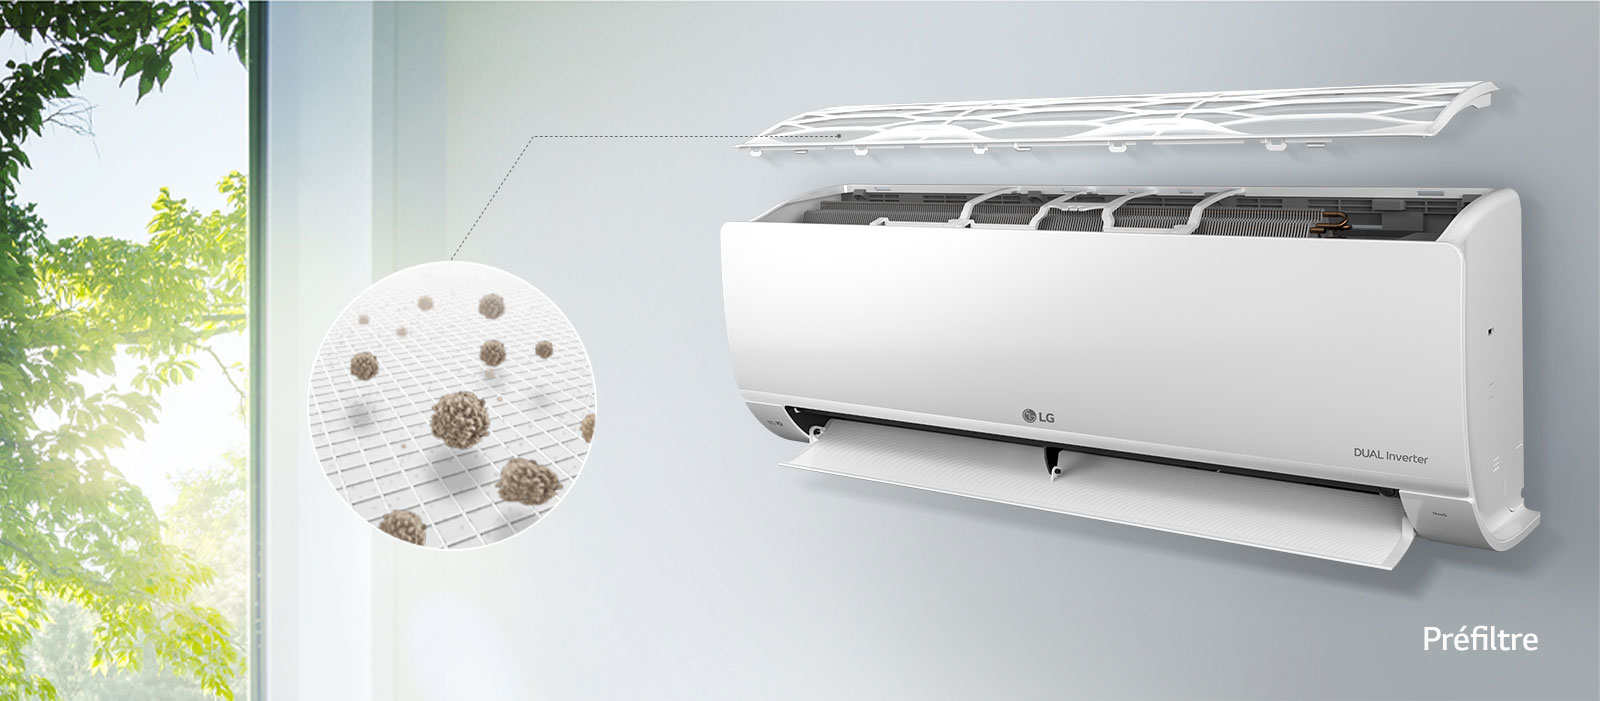 Air conditioner with open filter, and detail cut of filtered dust